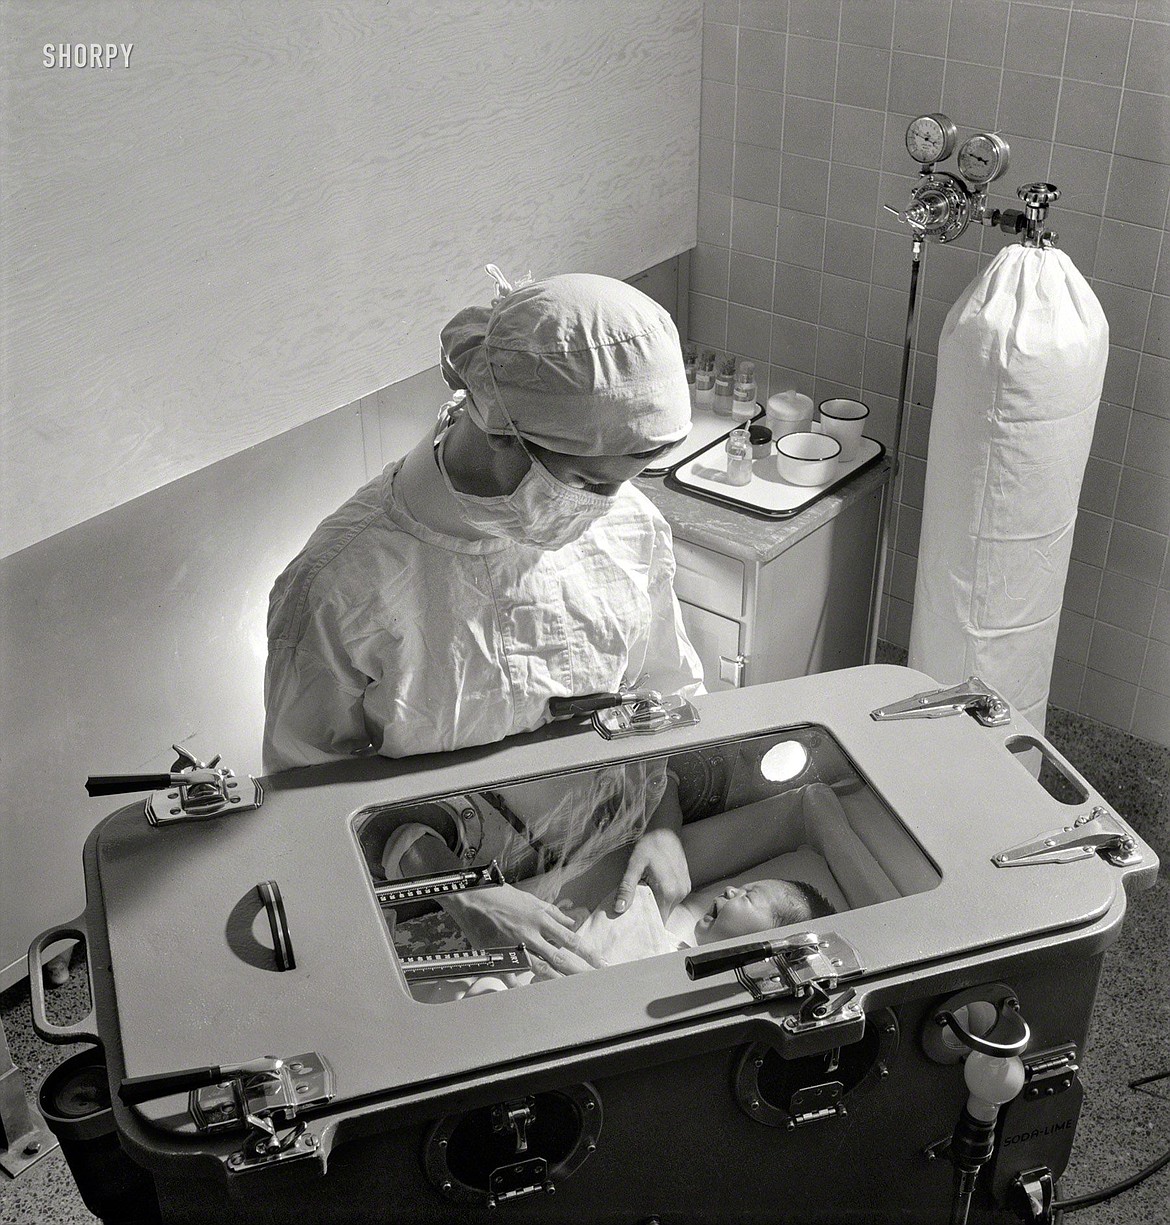 Nurse attending to a premature baby in “baby box” (1942).